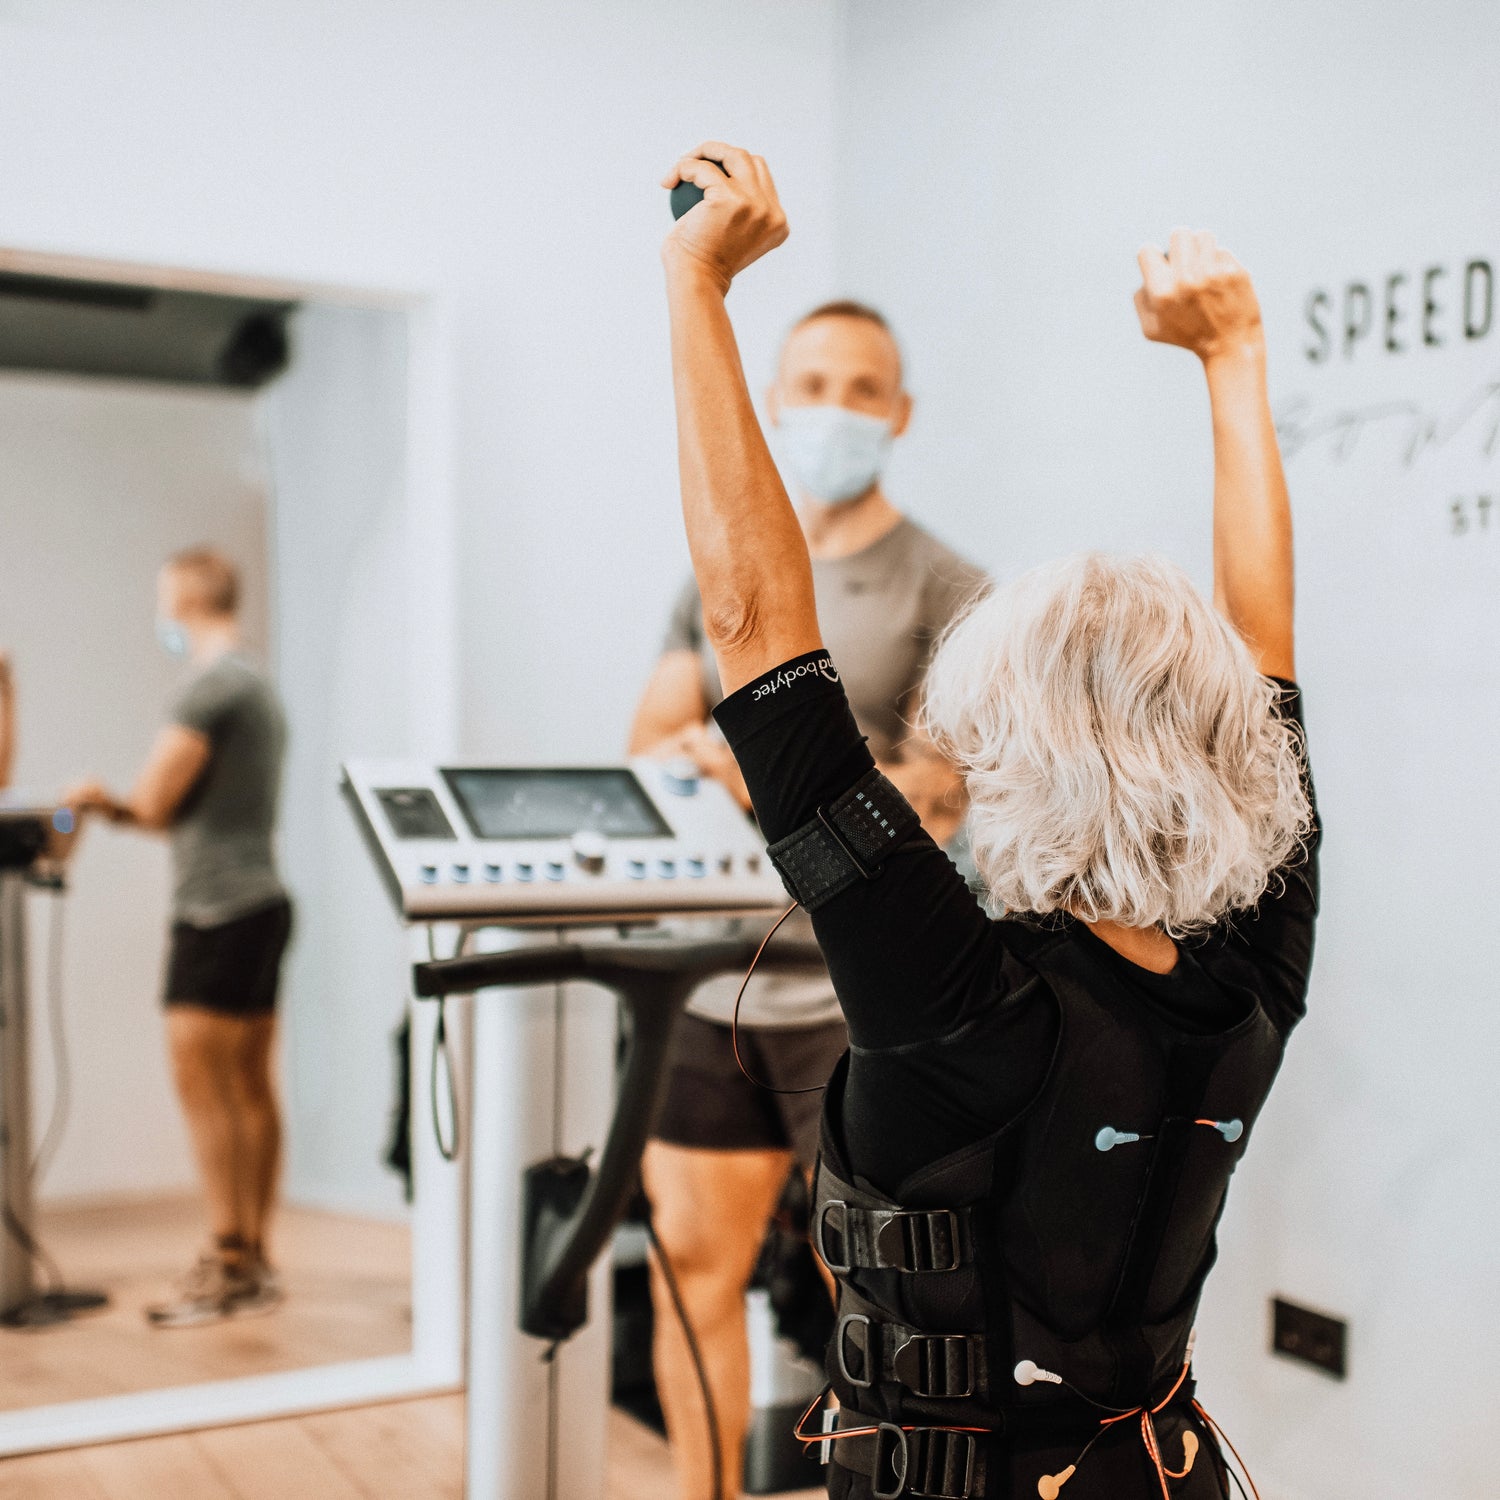 Its well known that having a physically fit and healthy body improves mental wellbeing, and that exercising is a great way for those in high-powered jobs to unwind, blow off steam, and regain their sense of perspective. 